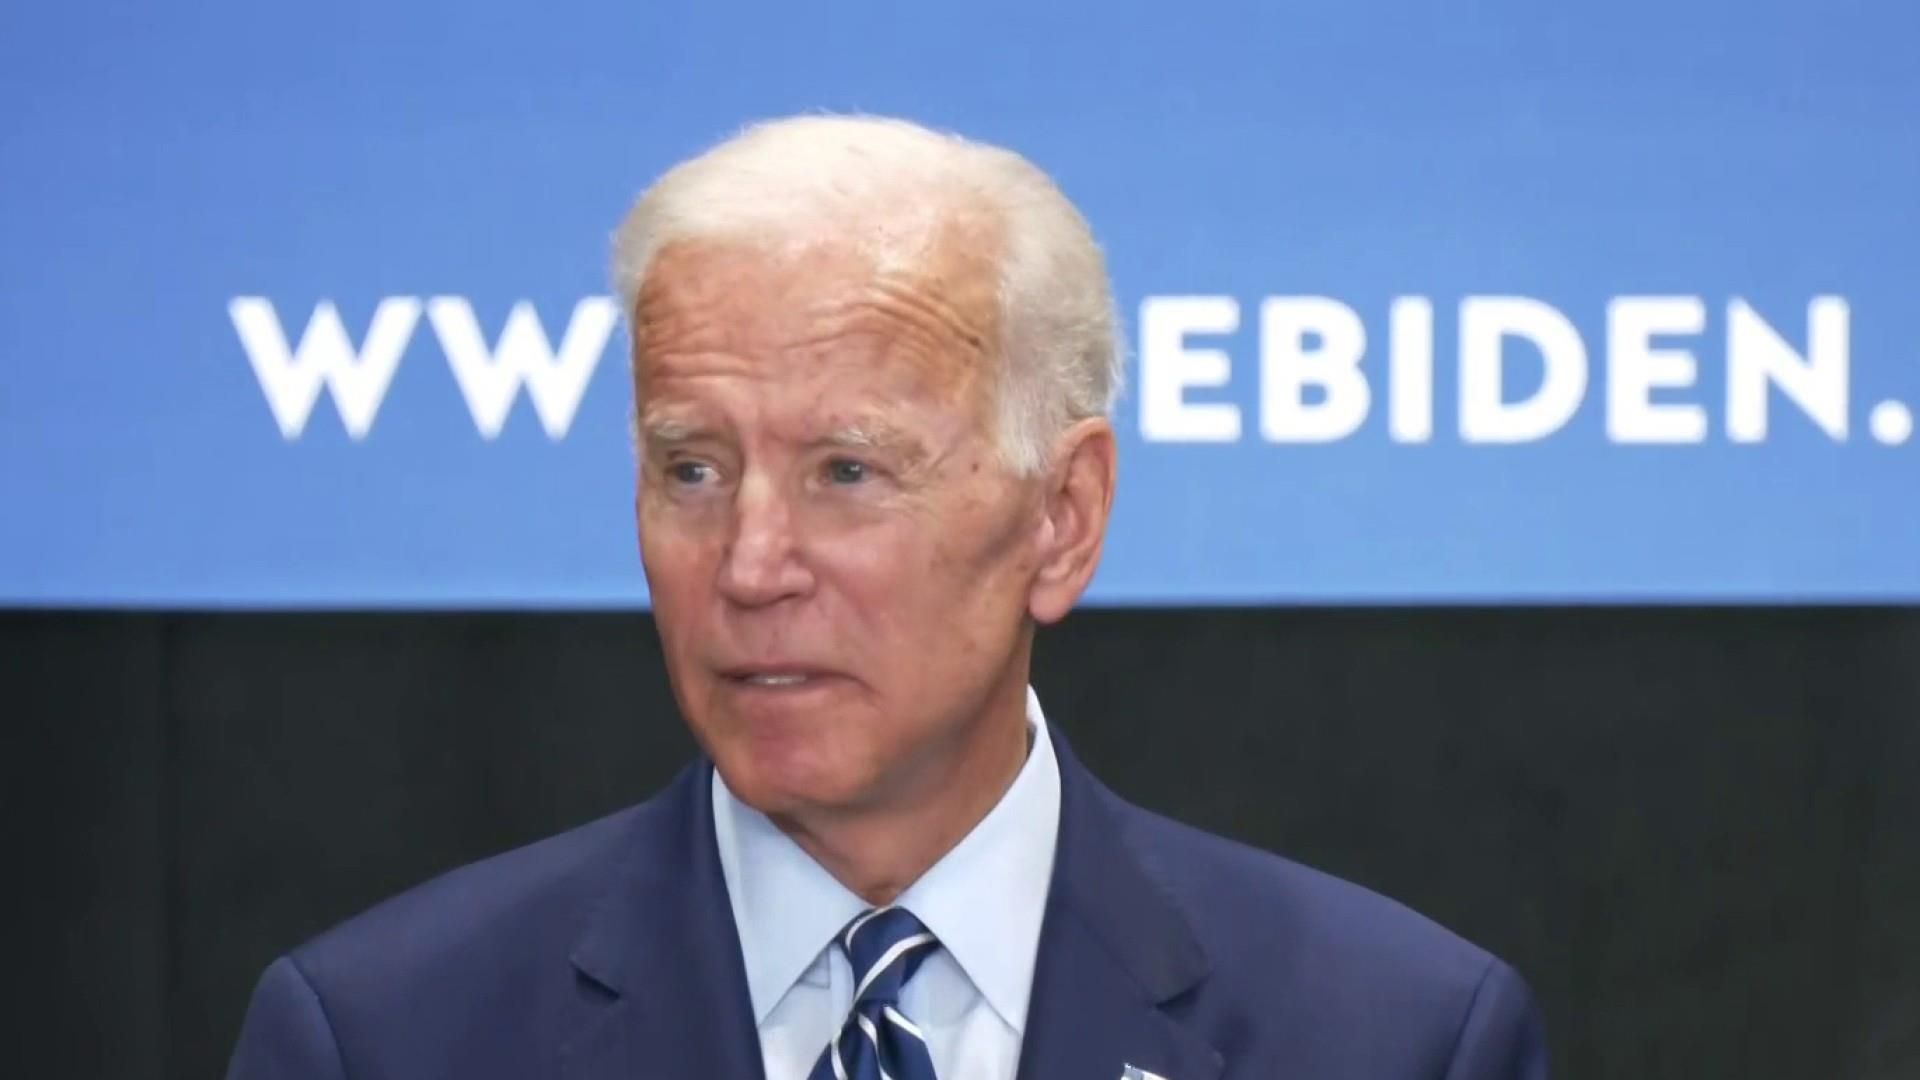 Joe Biden apologizes for recent remarks about his work